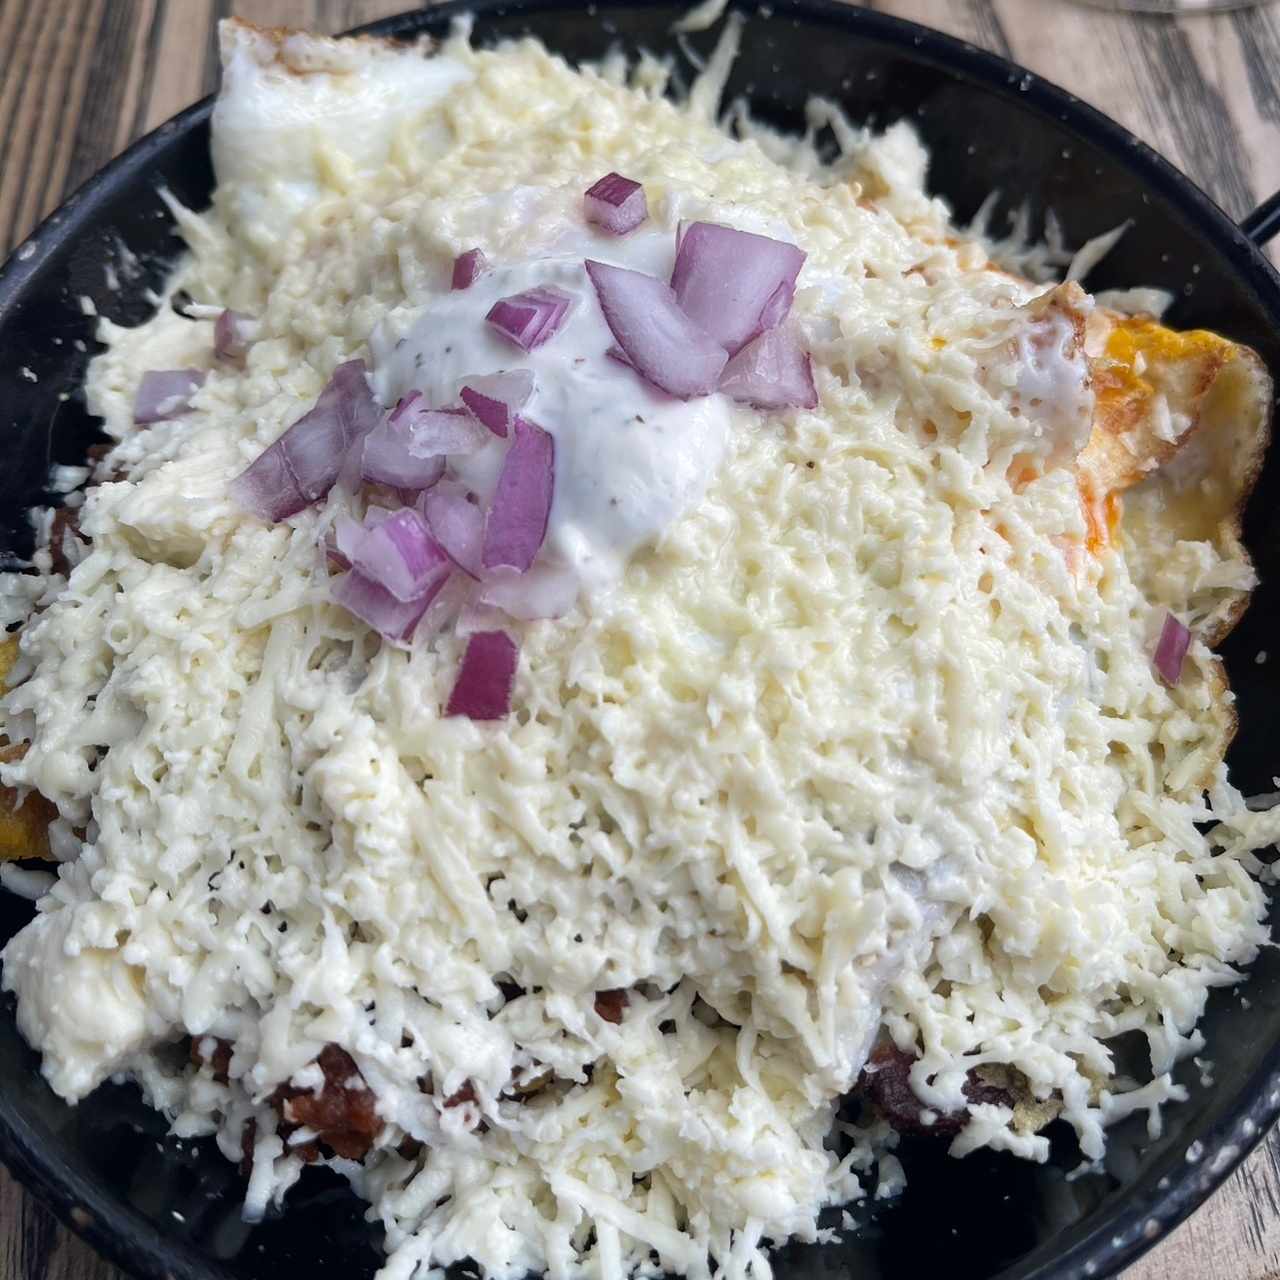 Brunch - Chilaquiles Panameños